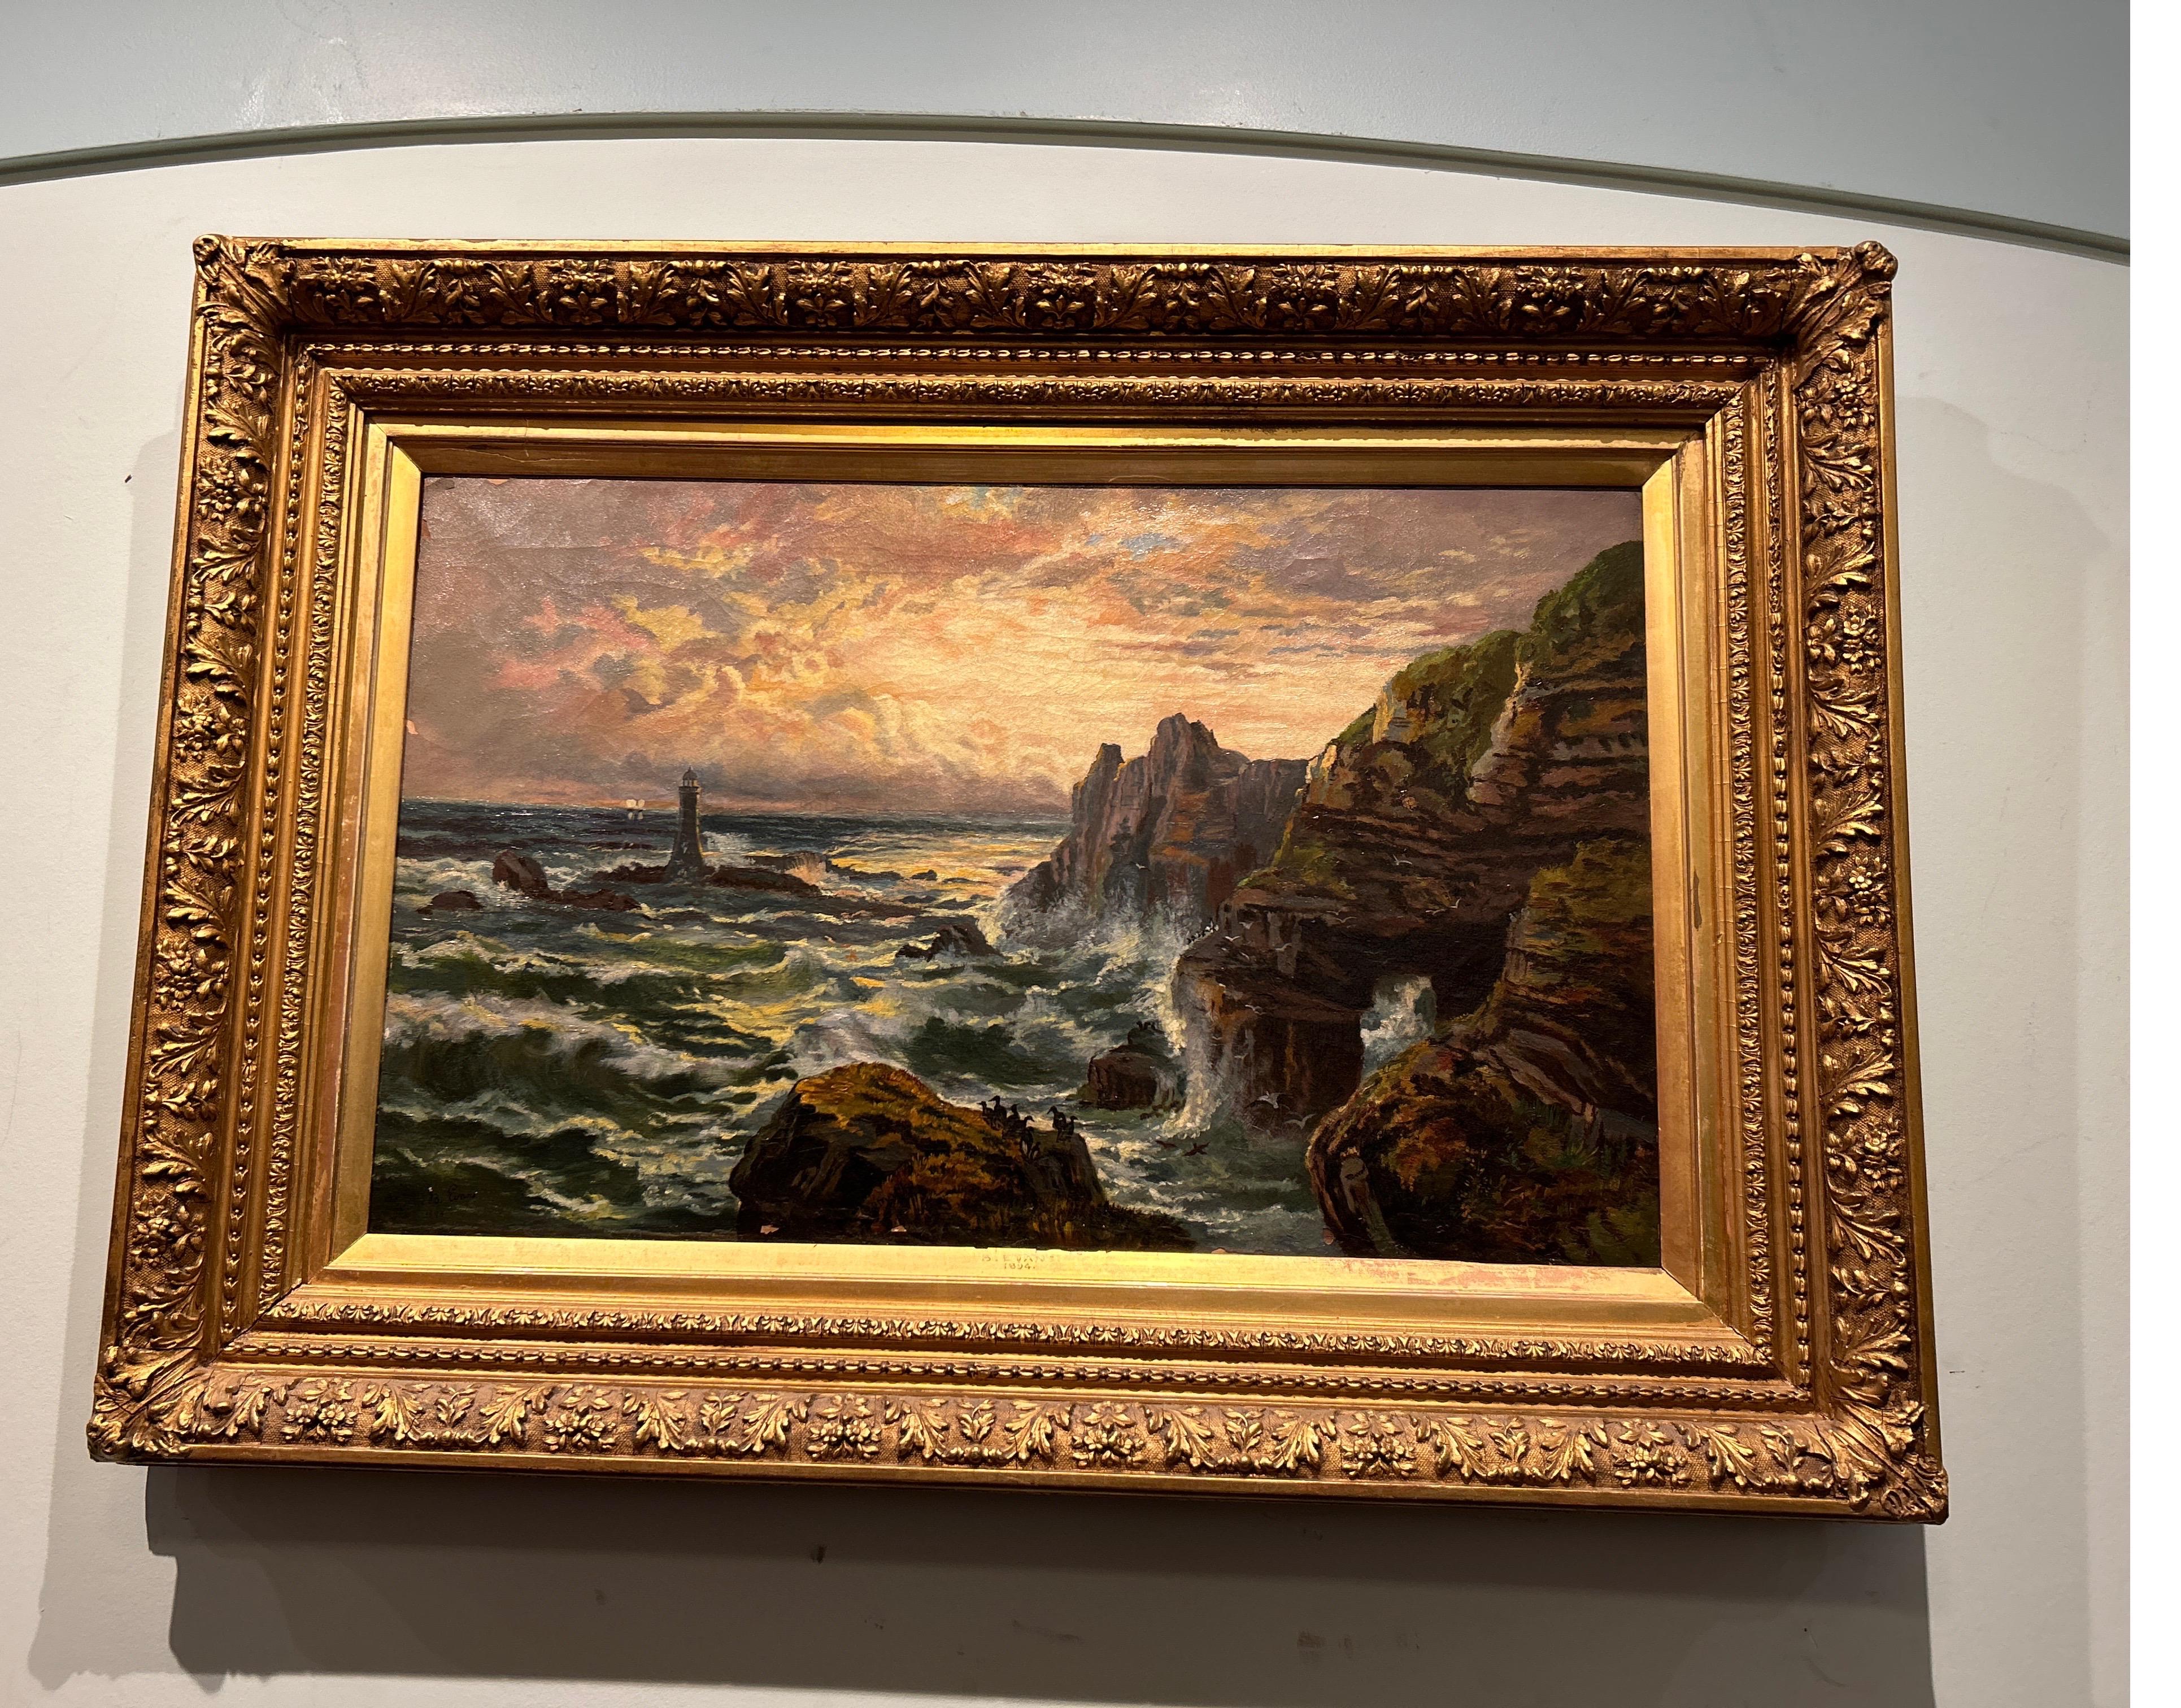 Signed English oil on canvas beautifully depicting cliffs and crashing waves on a rocky shoreline with cormorants at sunset. The original plaster of Paris frame shows beautifully. Some chips to the paint work visible on the canvas but otherwise the